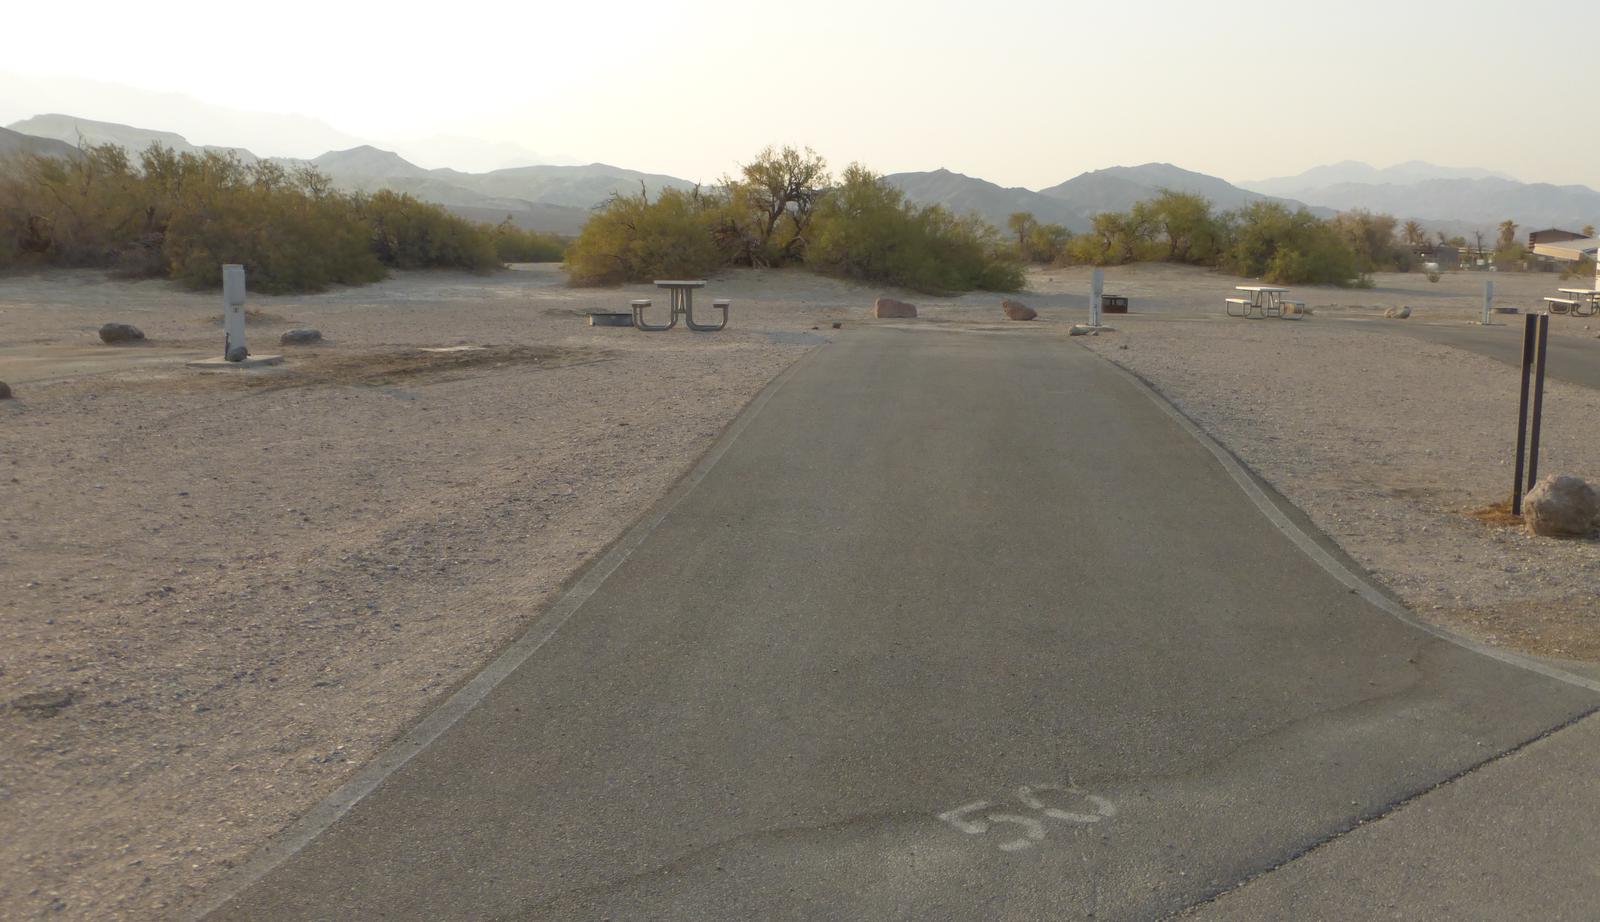 Furnace Creek Campground full hookup site #50. Water, sewer, and 30/50 amp electric connection. One fire pit and one picnic table.